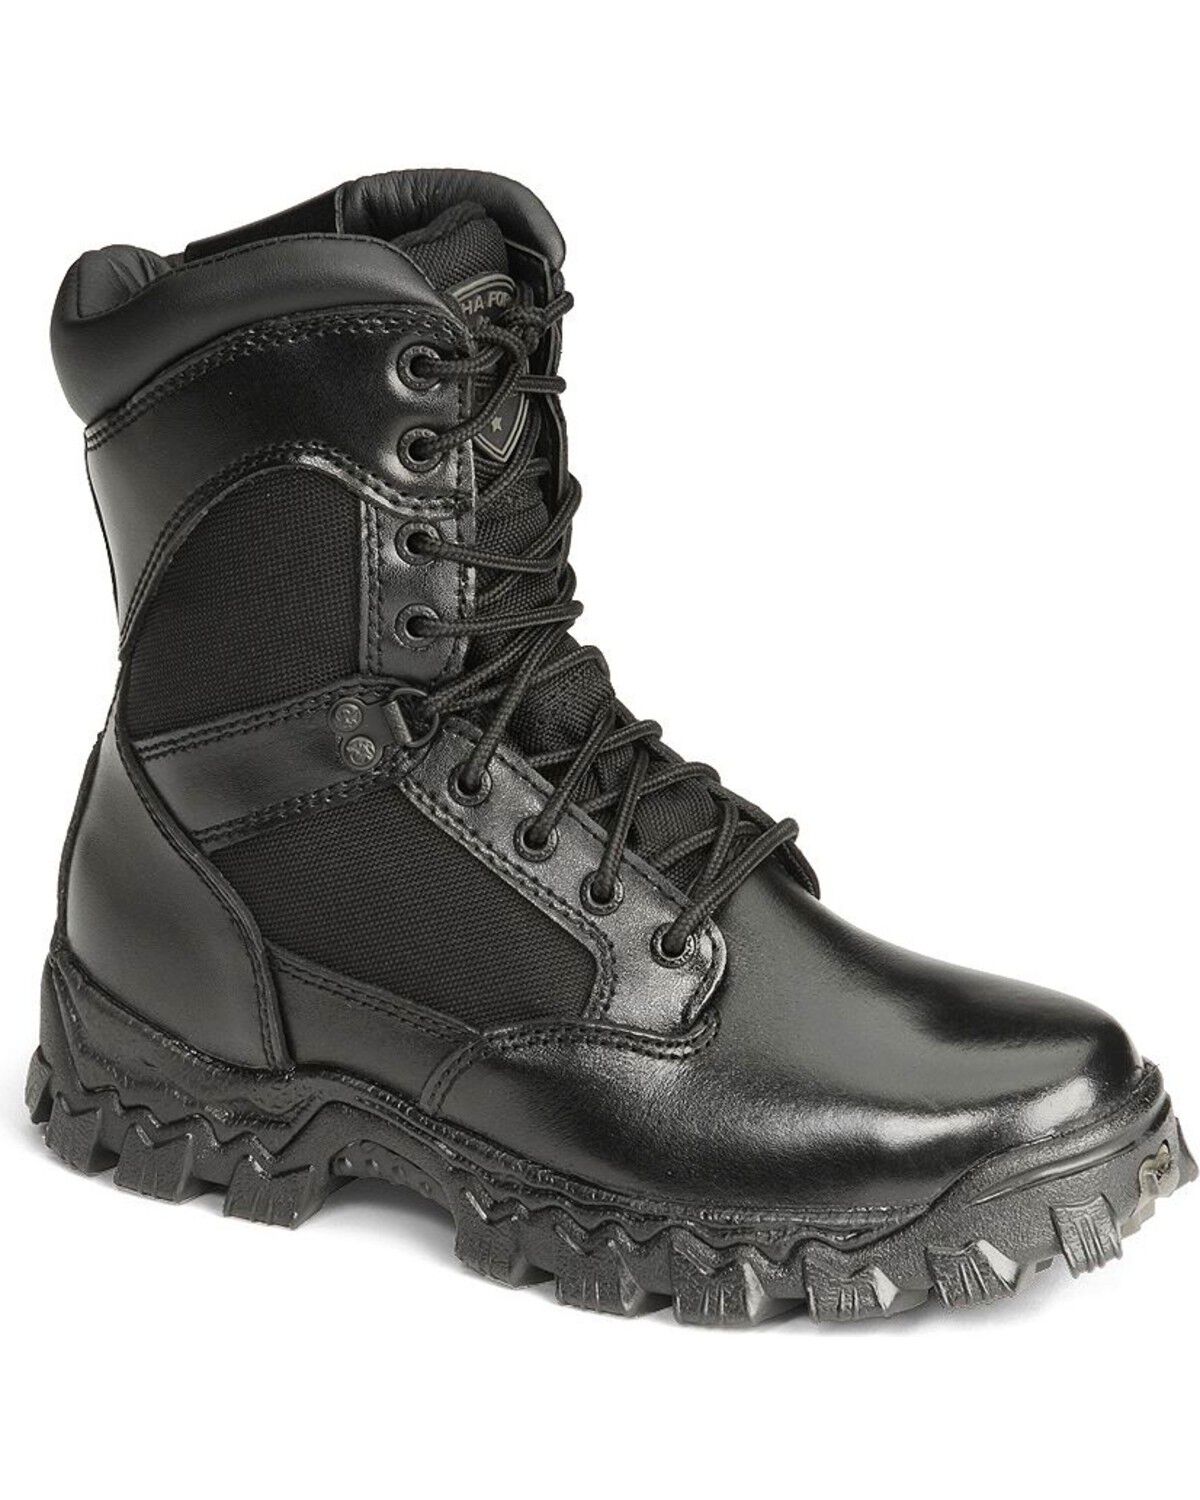 Service Industry Boots: Military 